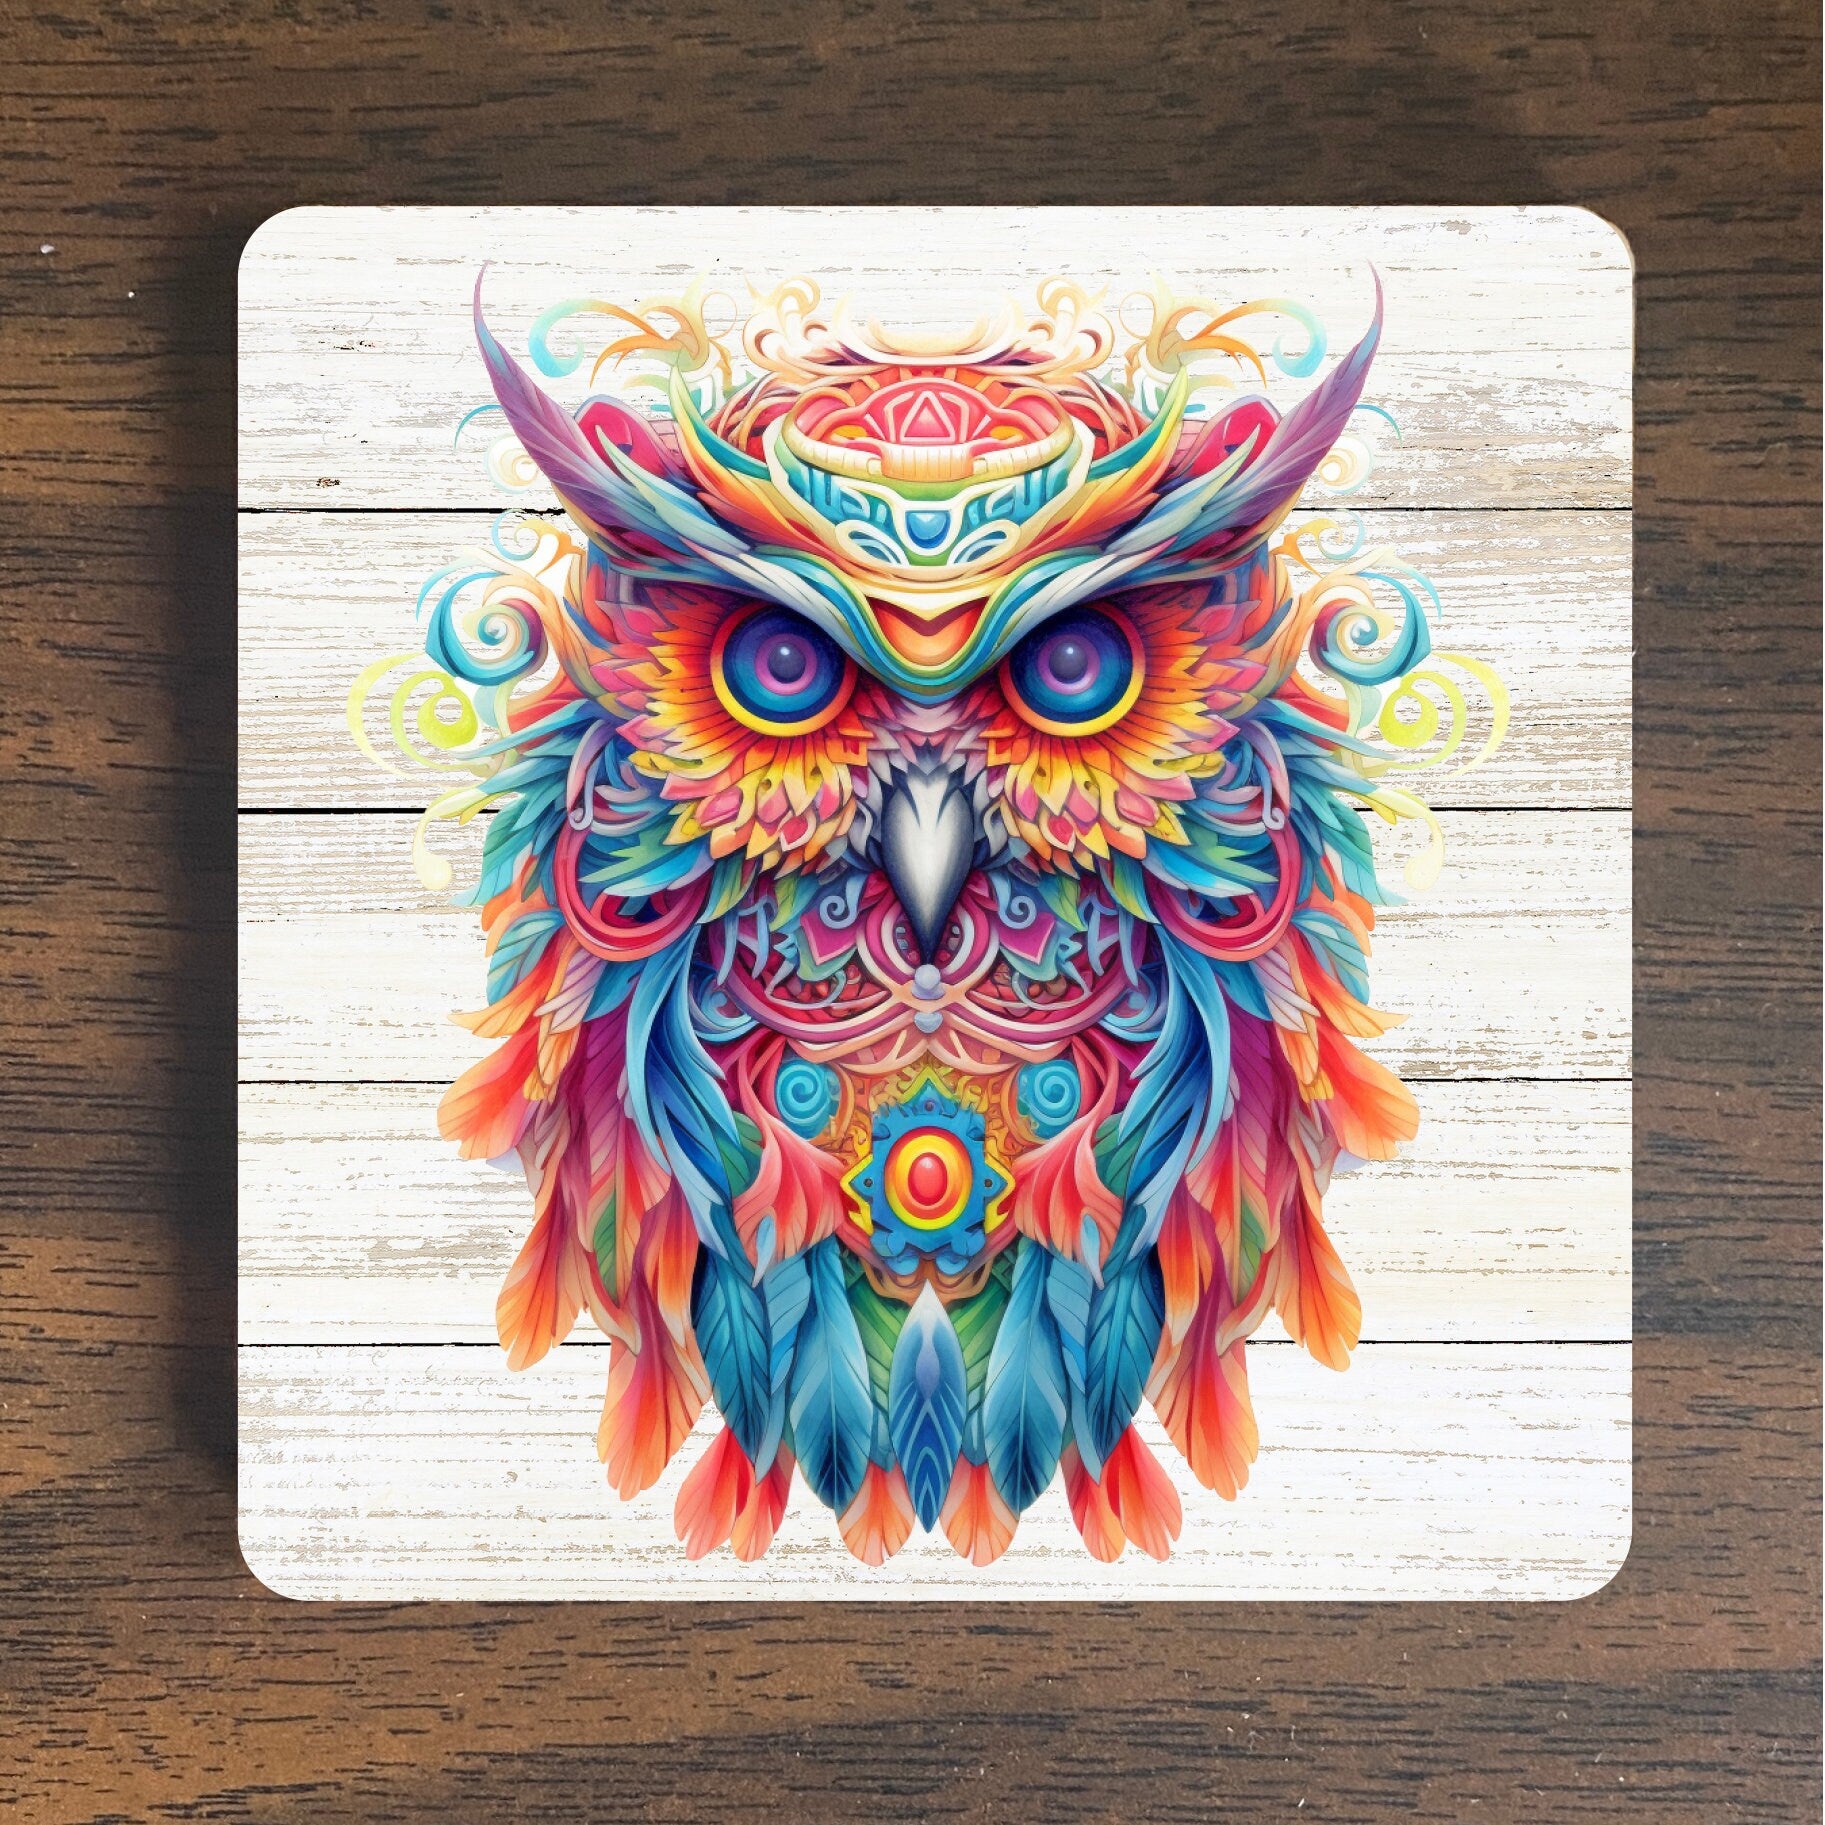 Whoooa-mazing Psychedelic Owl Magnet - Vibrant and Groovy Fridge Decor - Owl Magnet -   - Spiritual Magnet -  Refrigerator Magnet